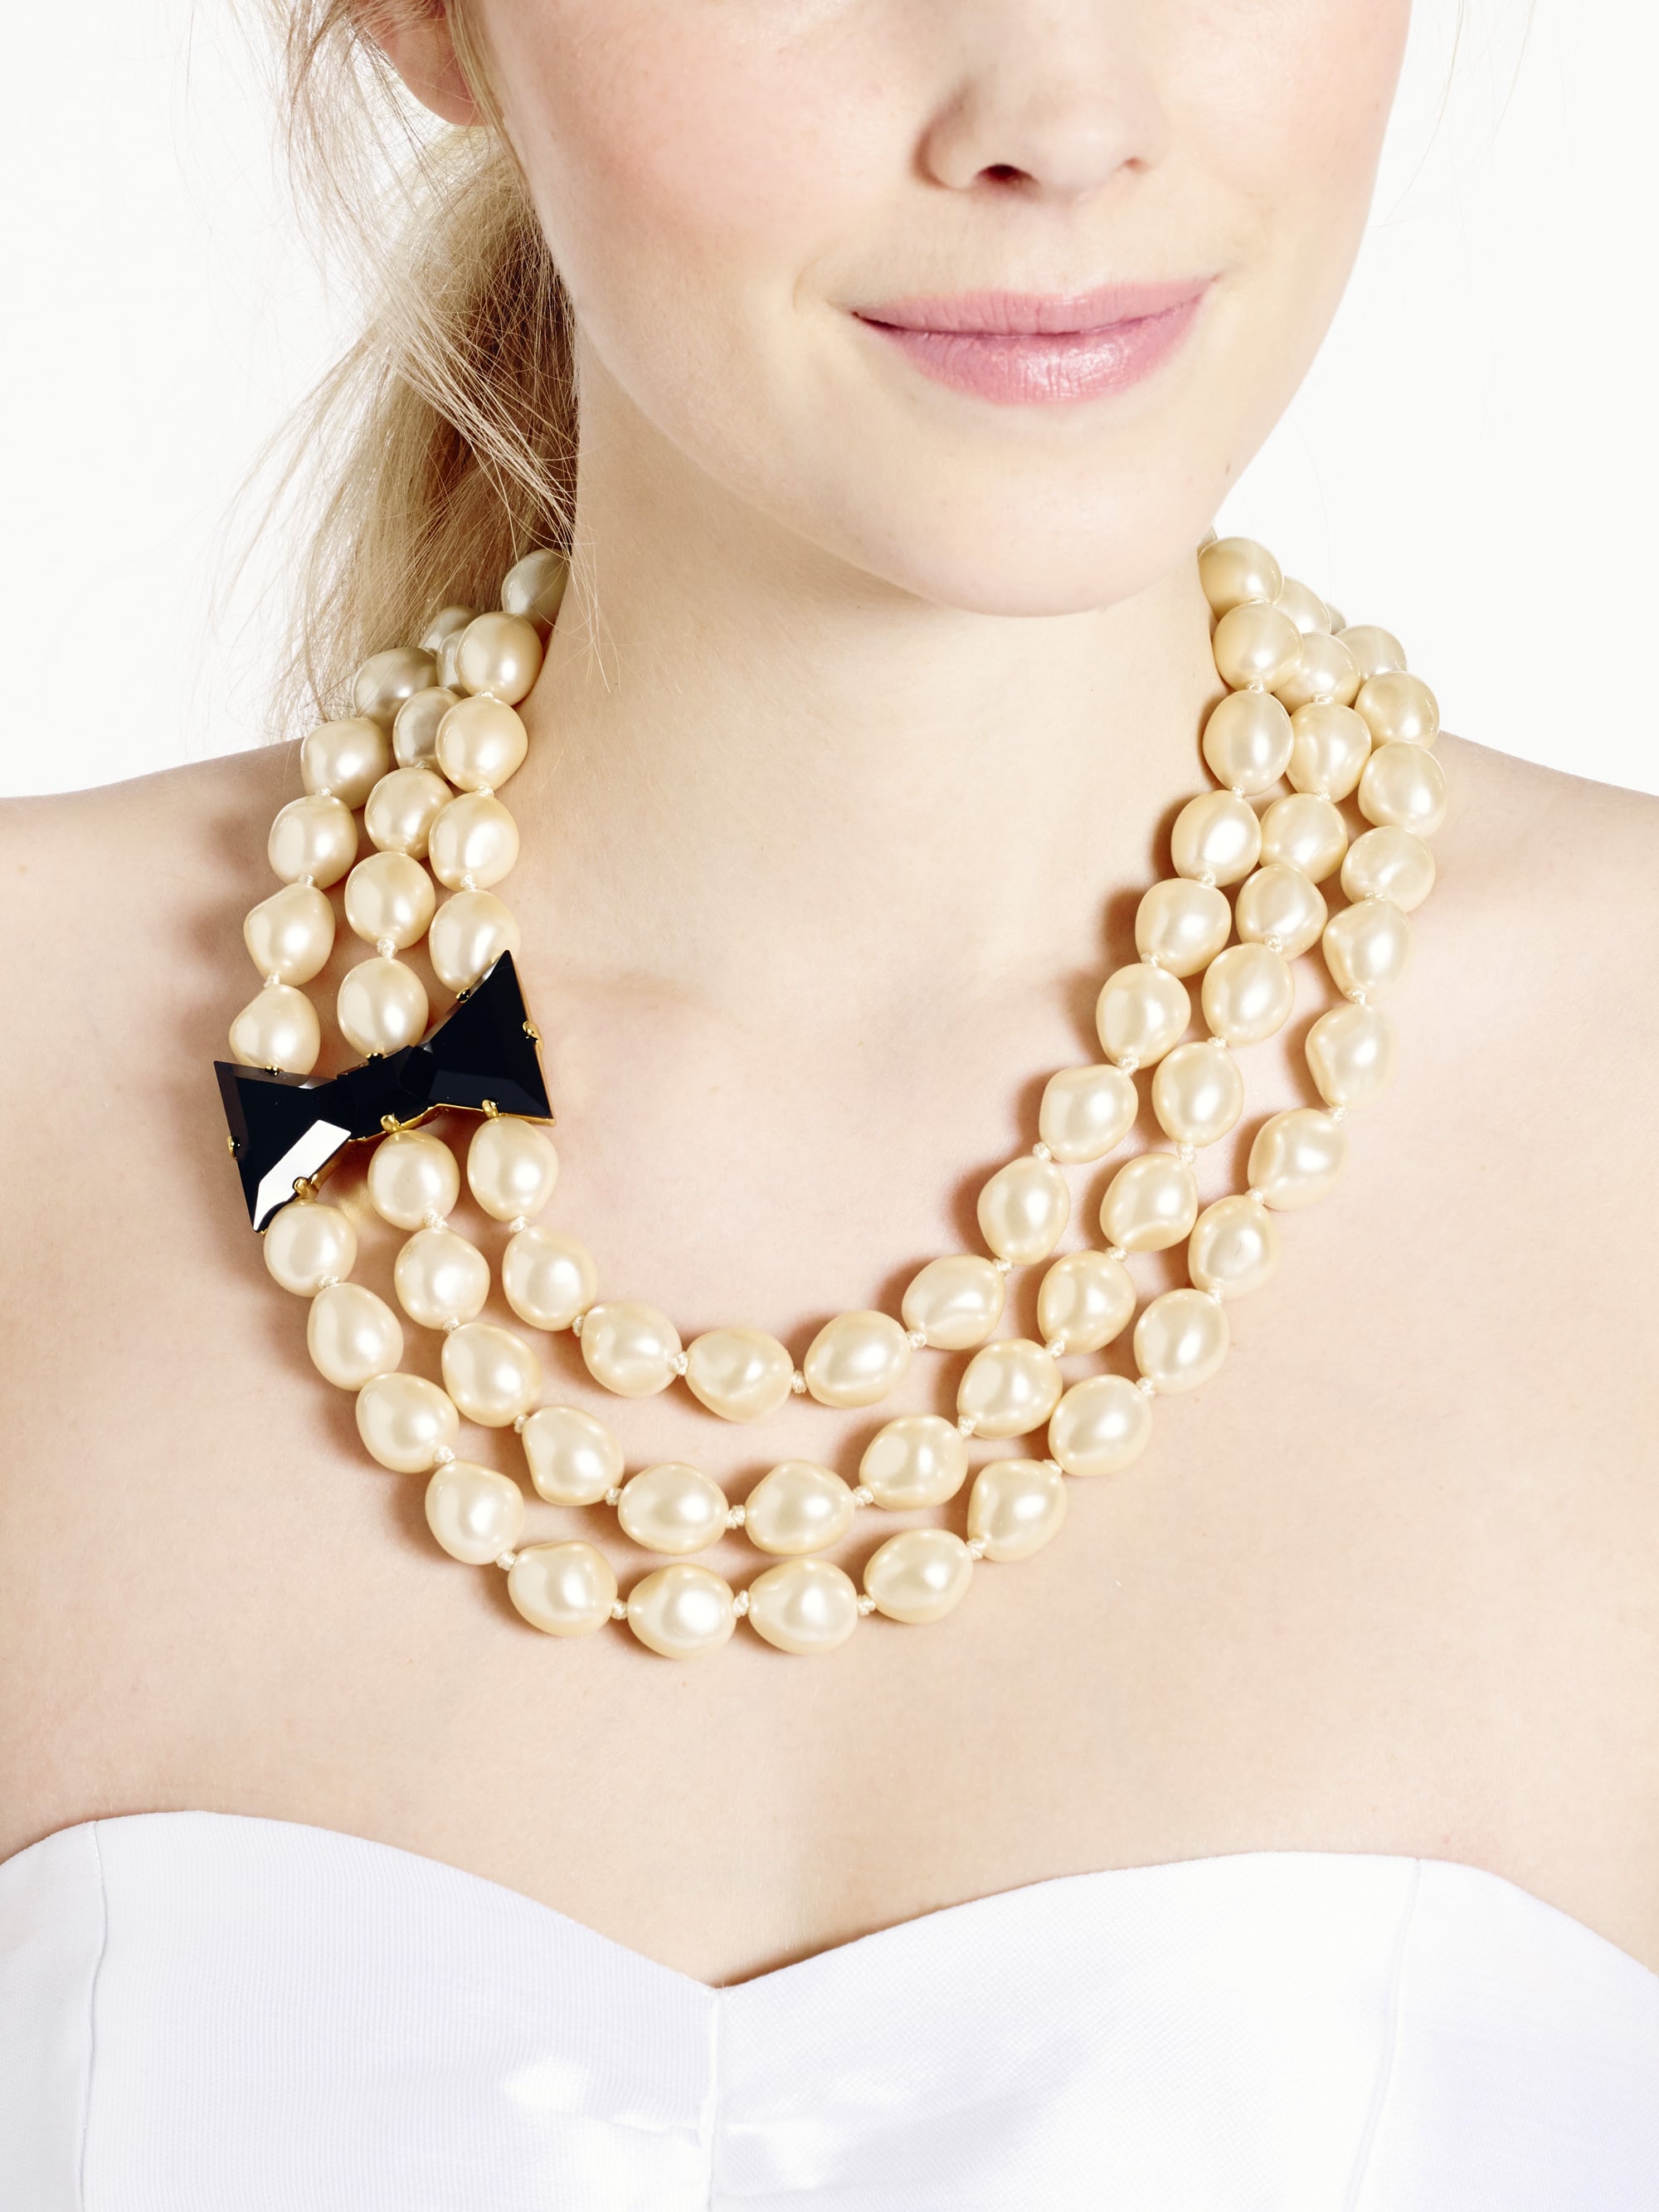 Kate Spade New York Black Tie Optional Three Strand Pearl Necklace | If  You're a Bride, You NEED to Shop This Kate Spade Sale! | POPSUGAR Fashion  Photo 6